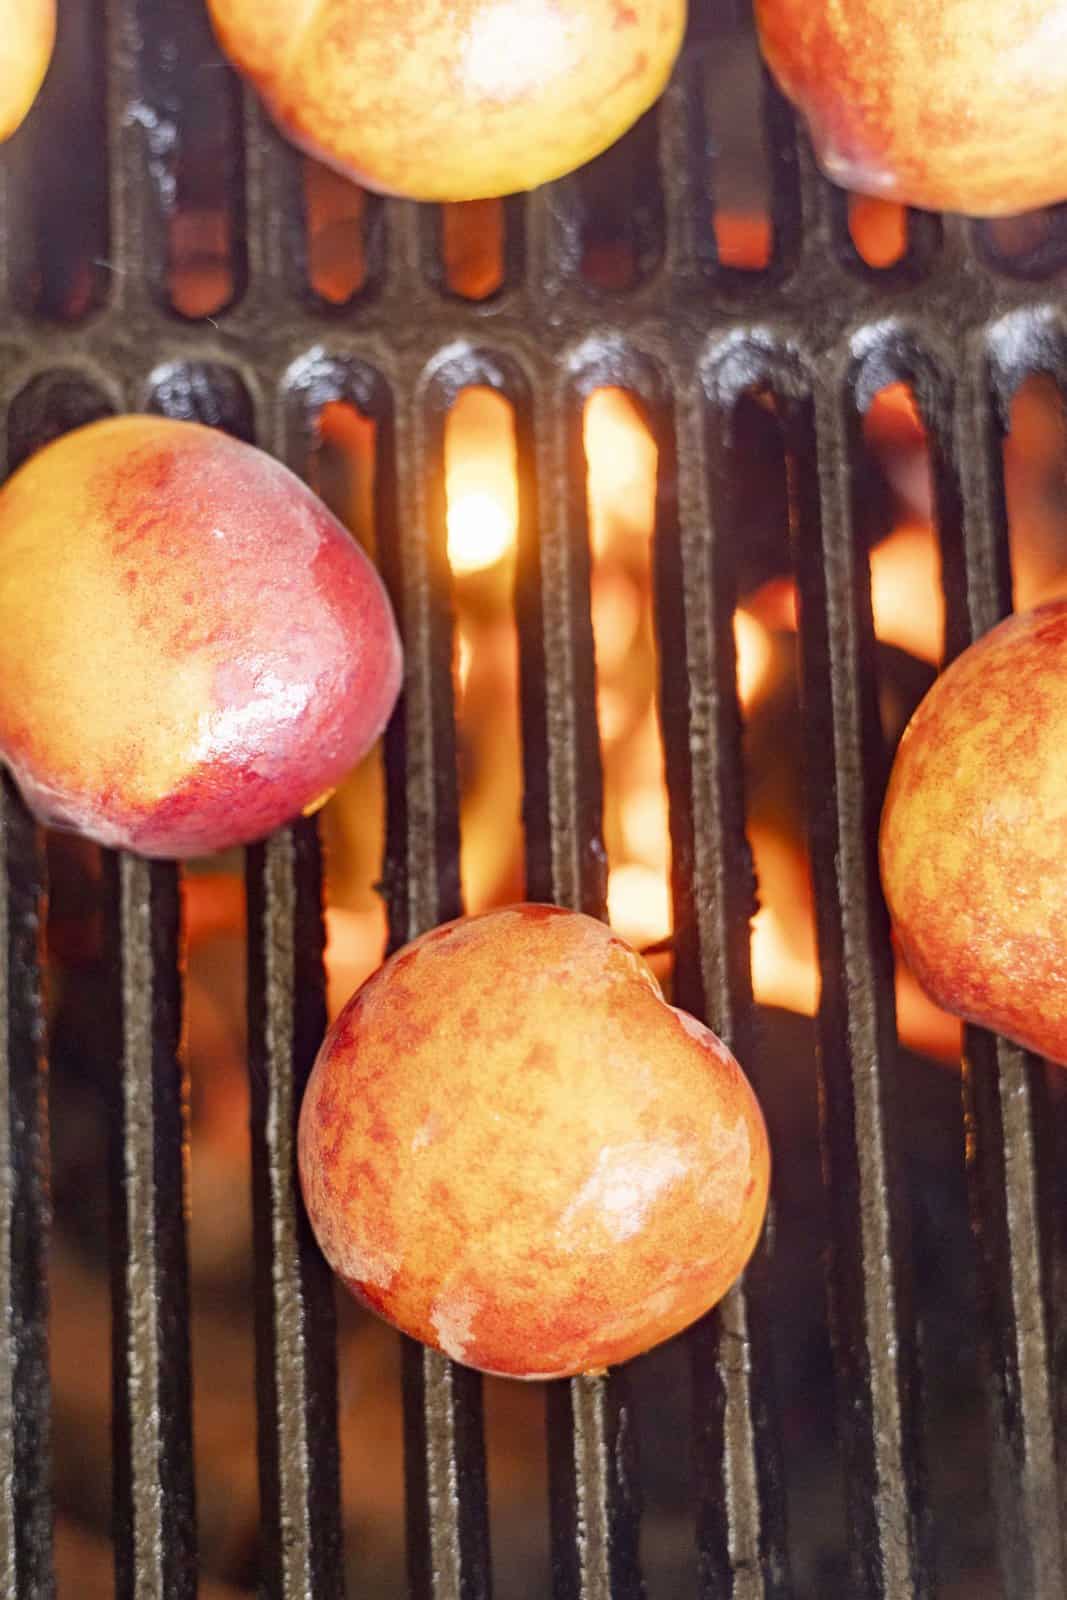 Cut side of peaches down on grill.